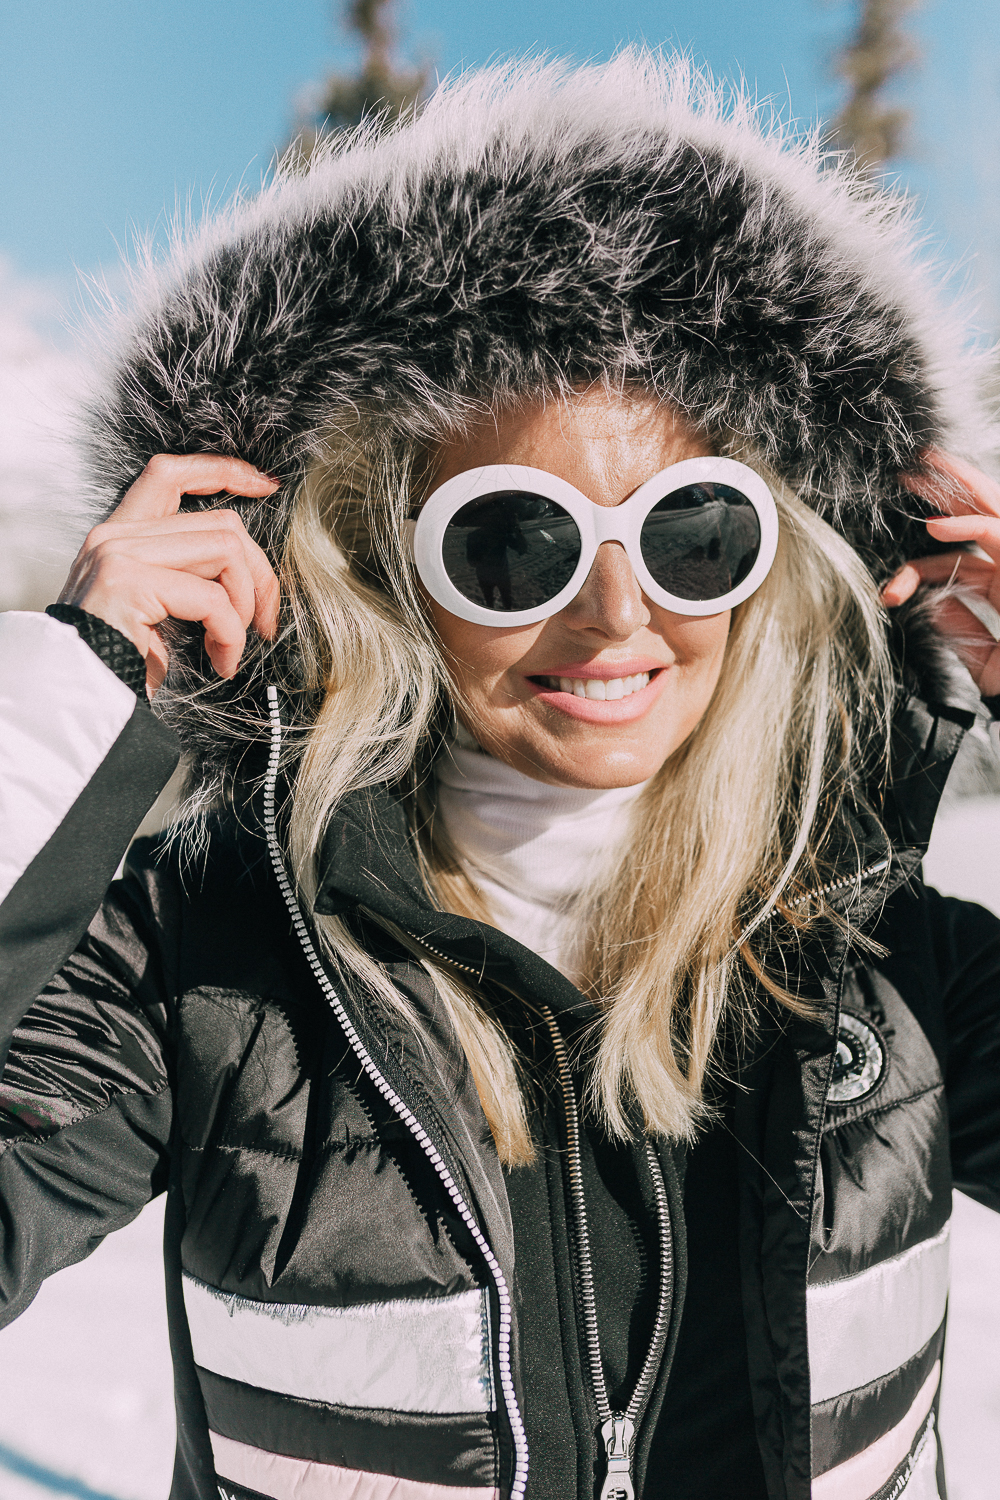 How to Stay Warm Socializing Outside? Snowsuits and Wearable